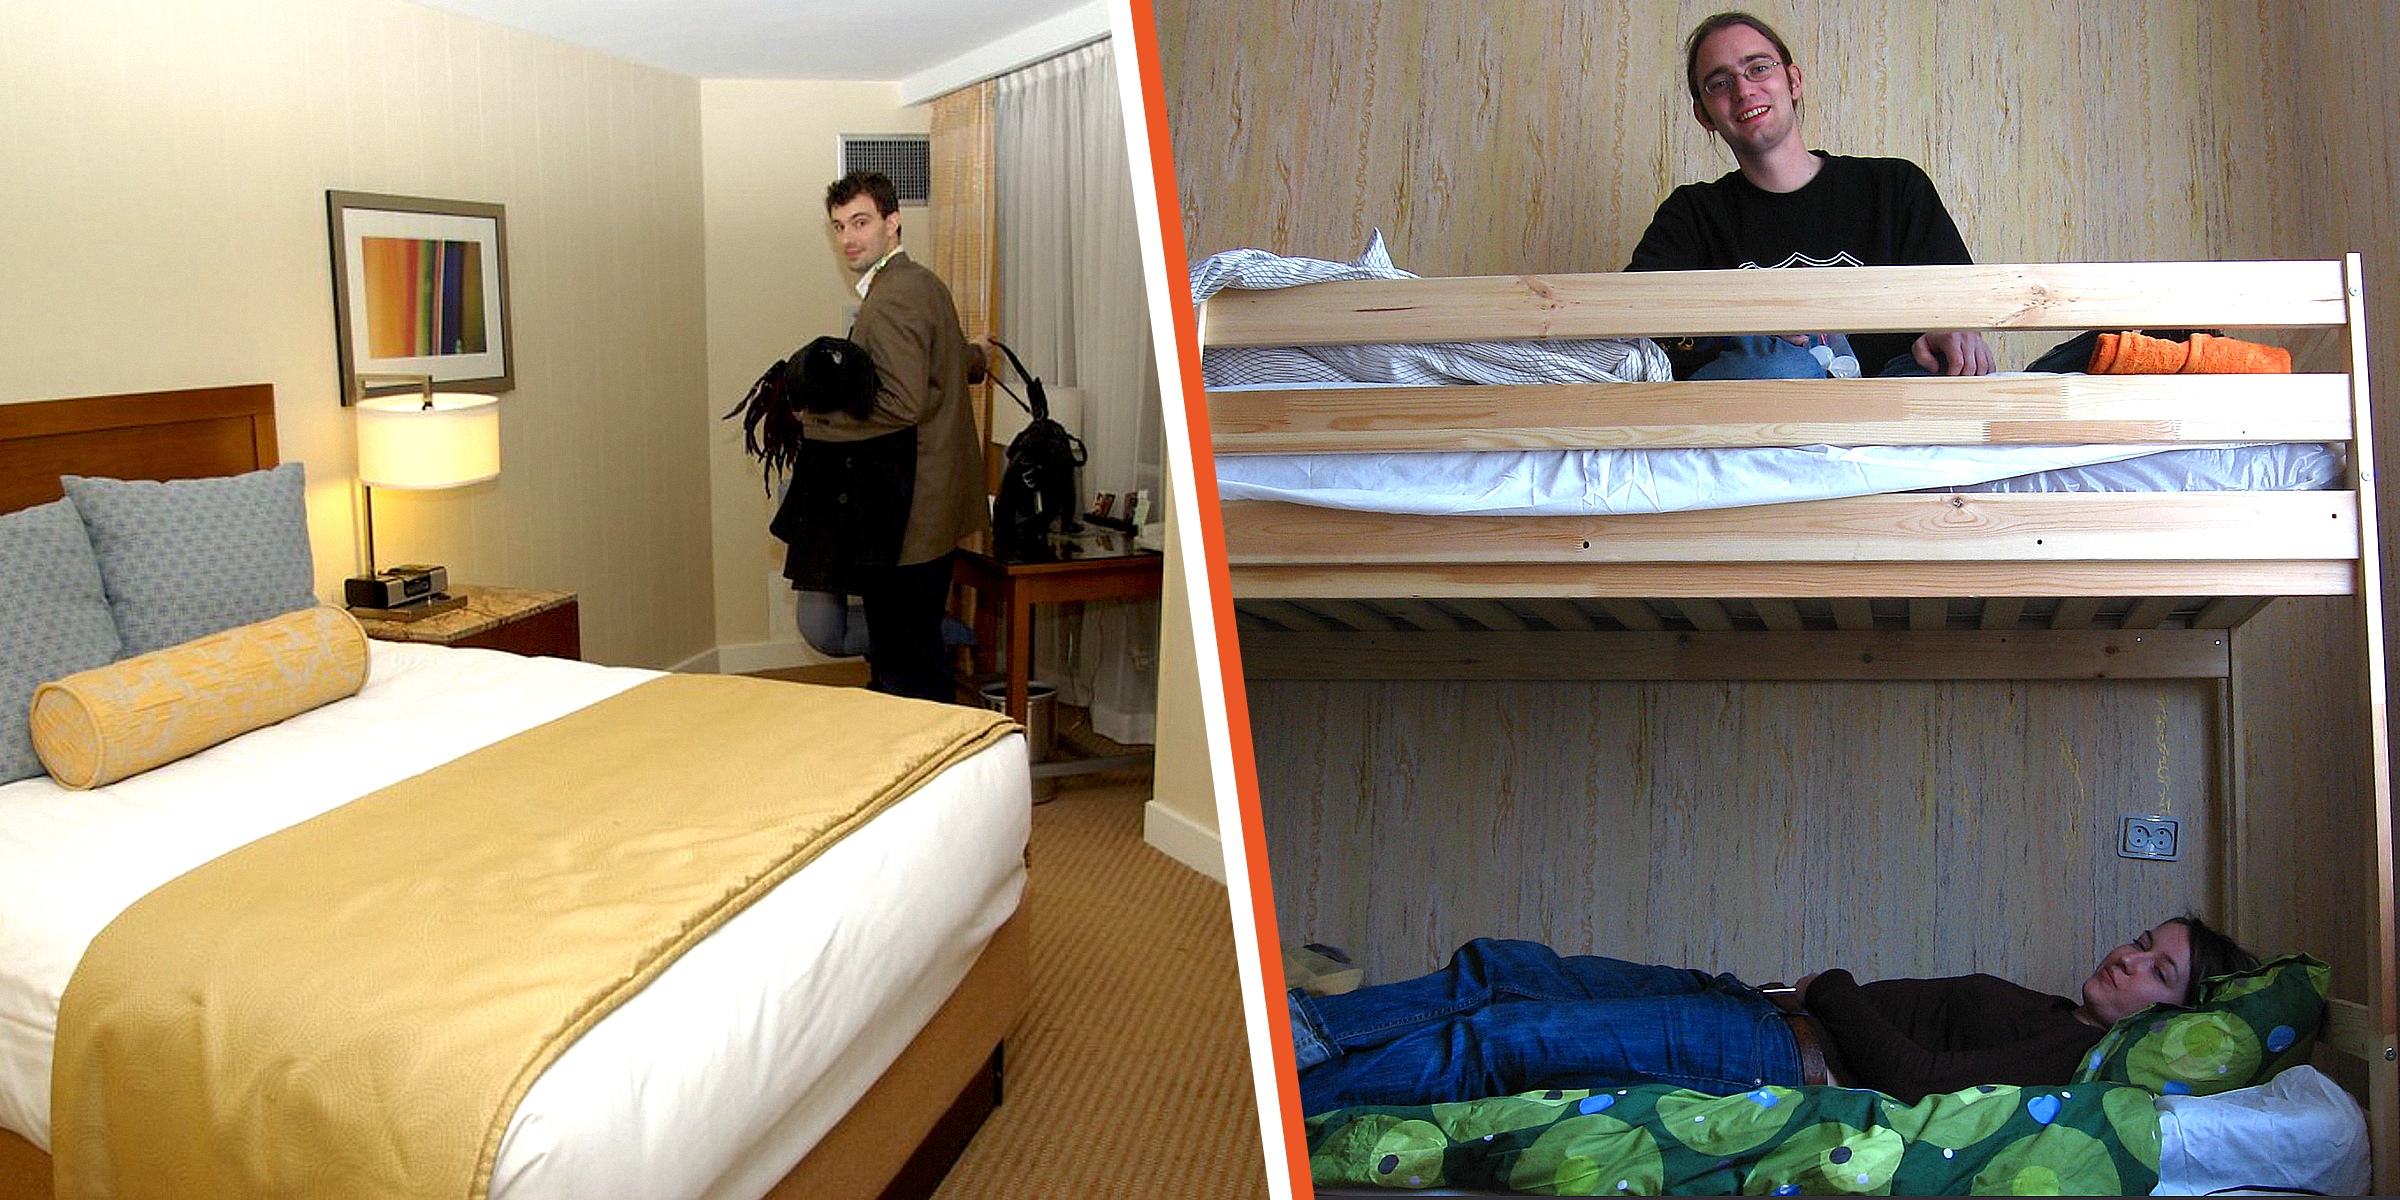 A man in a hotel room | People in a hostel | Source: Flickr